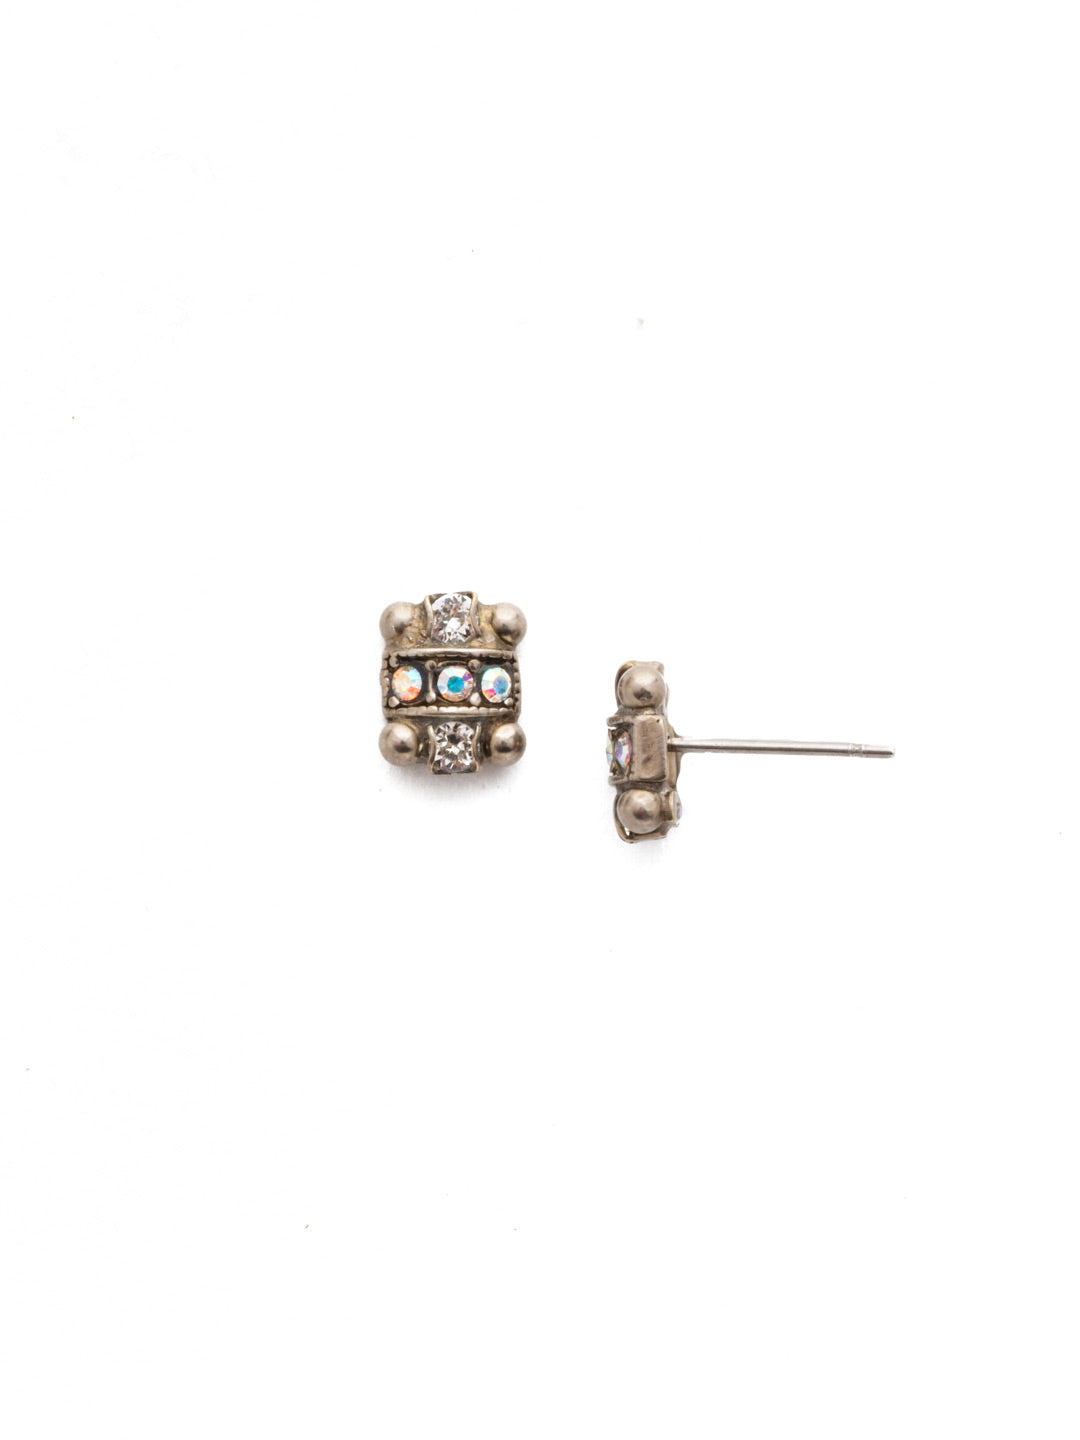 Etta Stud Earrings - EDZ7ASWBR - A classic Sorrelli style to make a statement or wear everyday. From Sorrelli's White Bridal collection in our Antique Silver-tone finish.